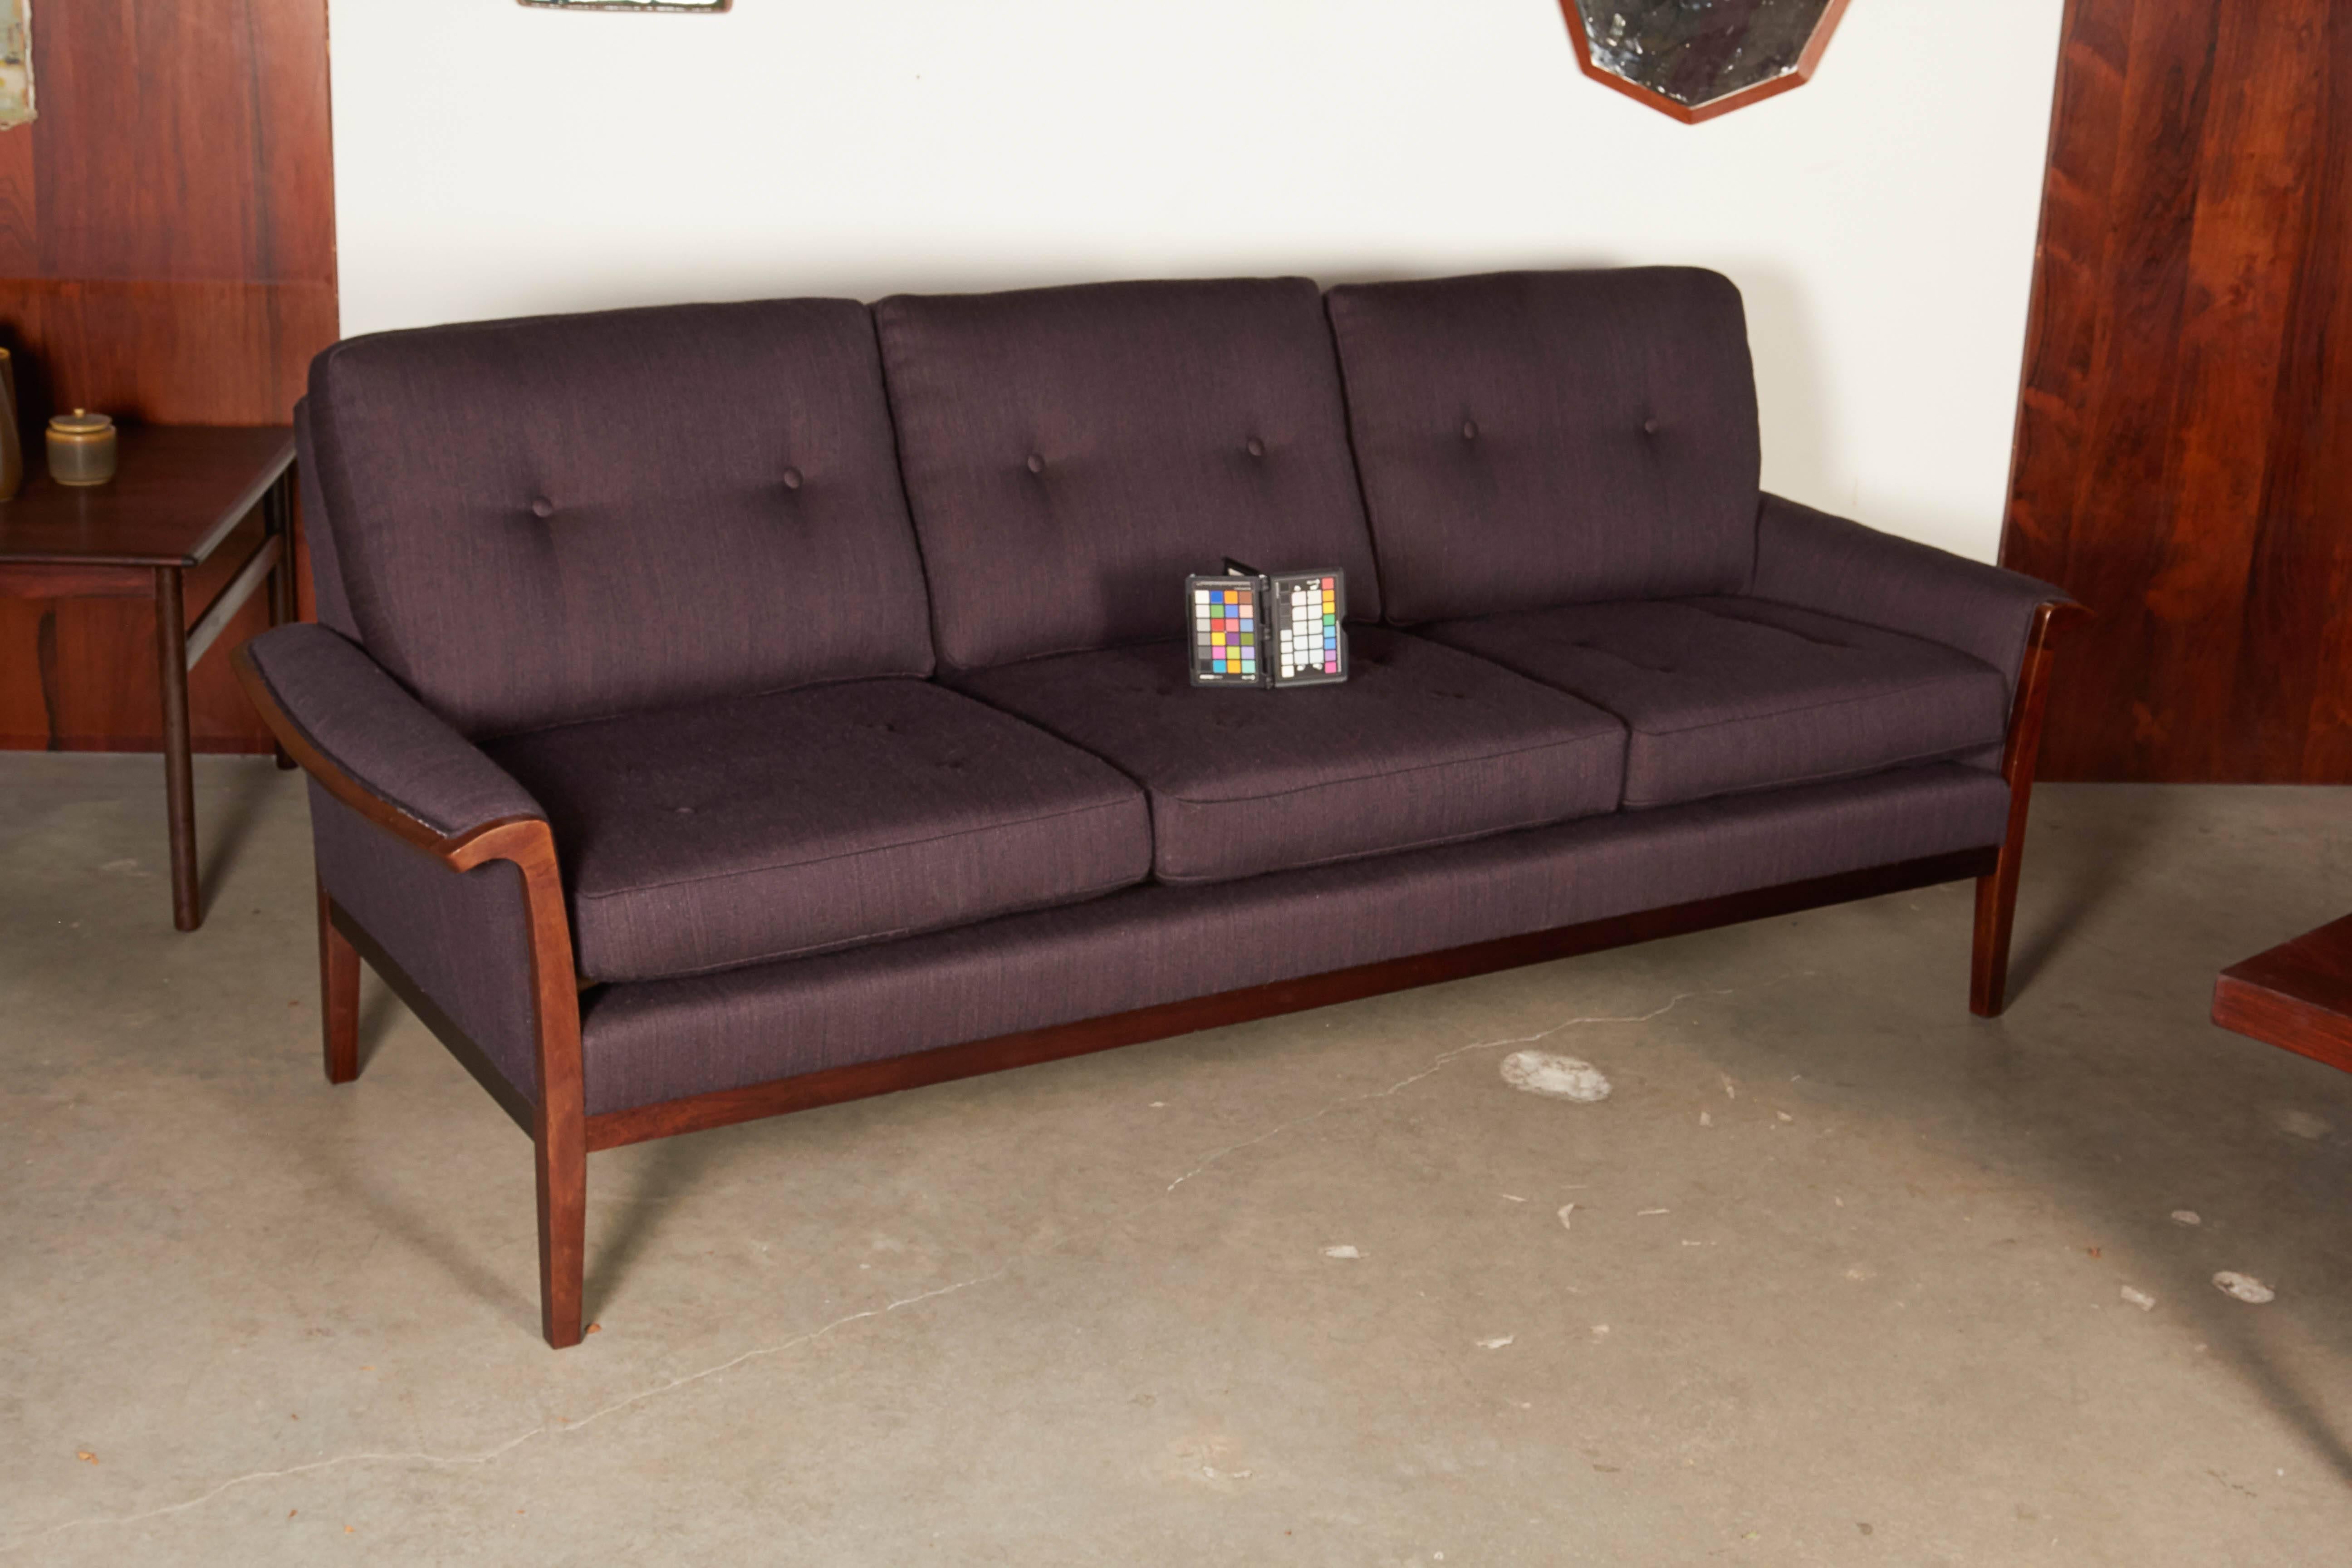 Vintage 1960s Knut Saeter Sofa in Aubergine Purple

This Danish Modern couch is so amazingly soft and comfy. You'll never know until you try it. We upholstered it in this really soft and elegant dark purple Irish wool blend. Ready for pick up,